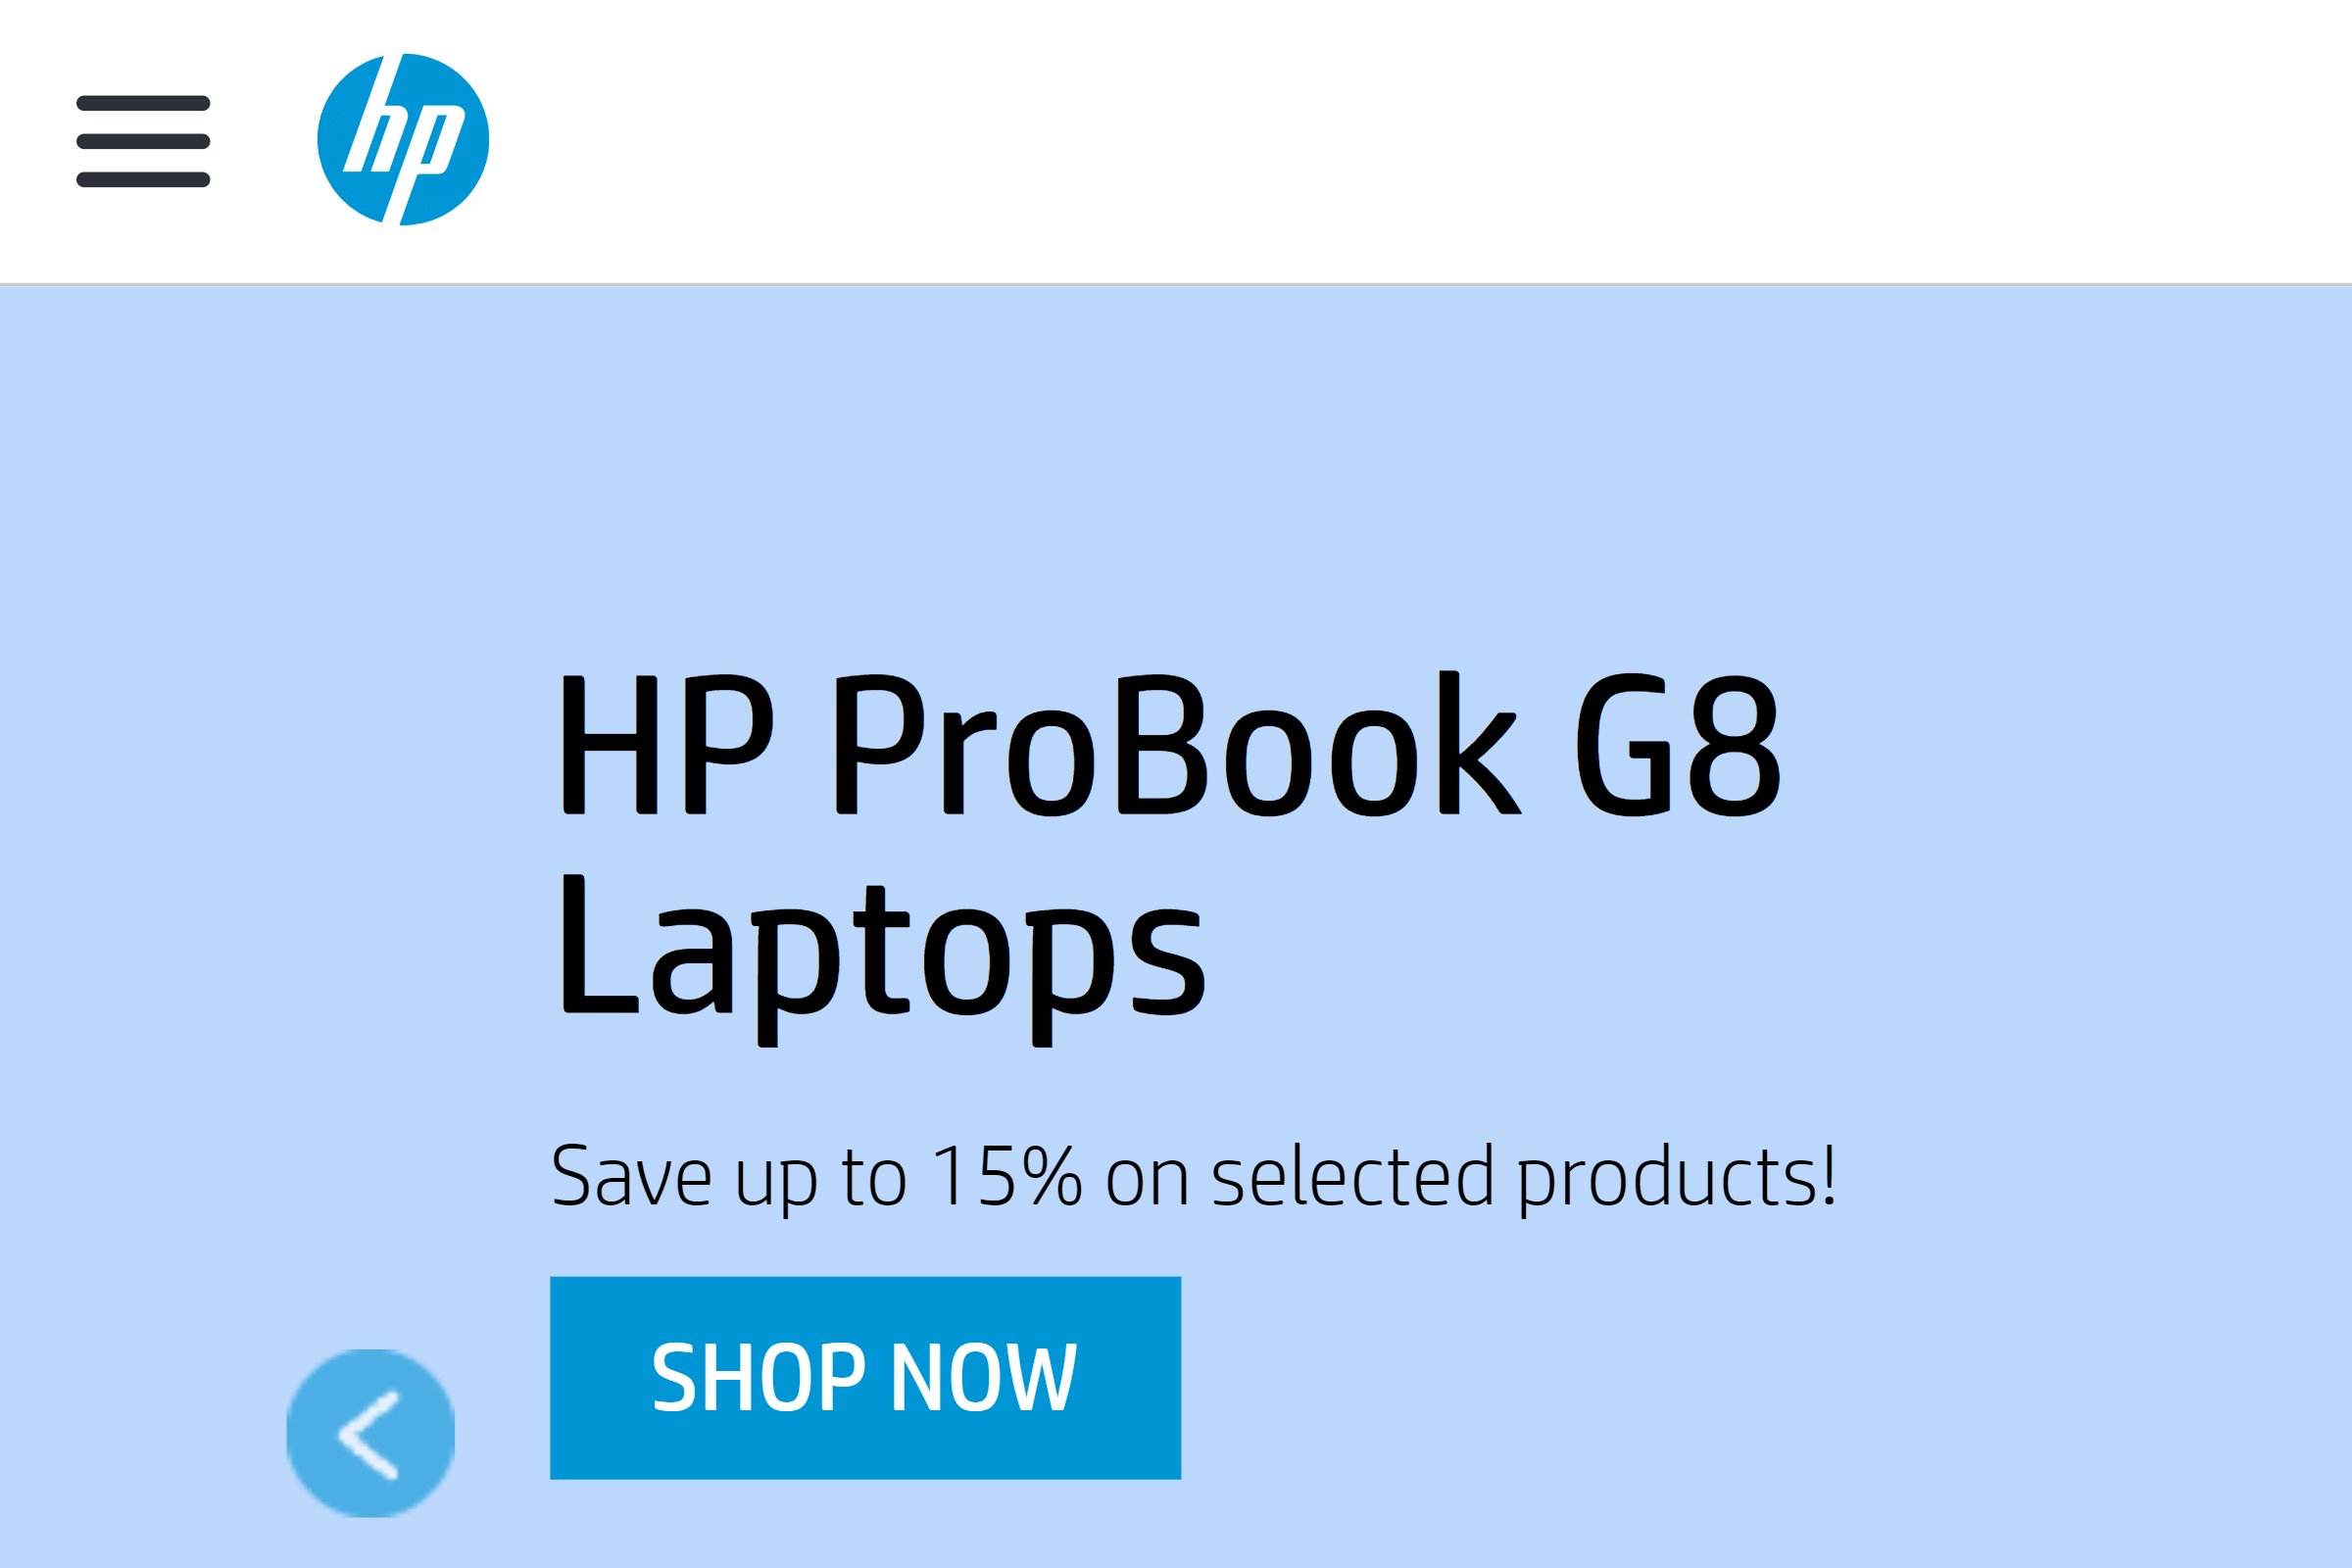 HP® on ReadSomeReviews